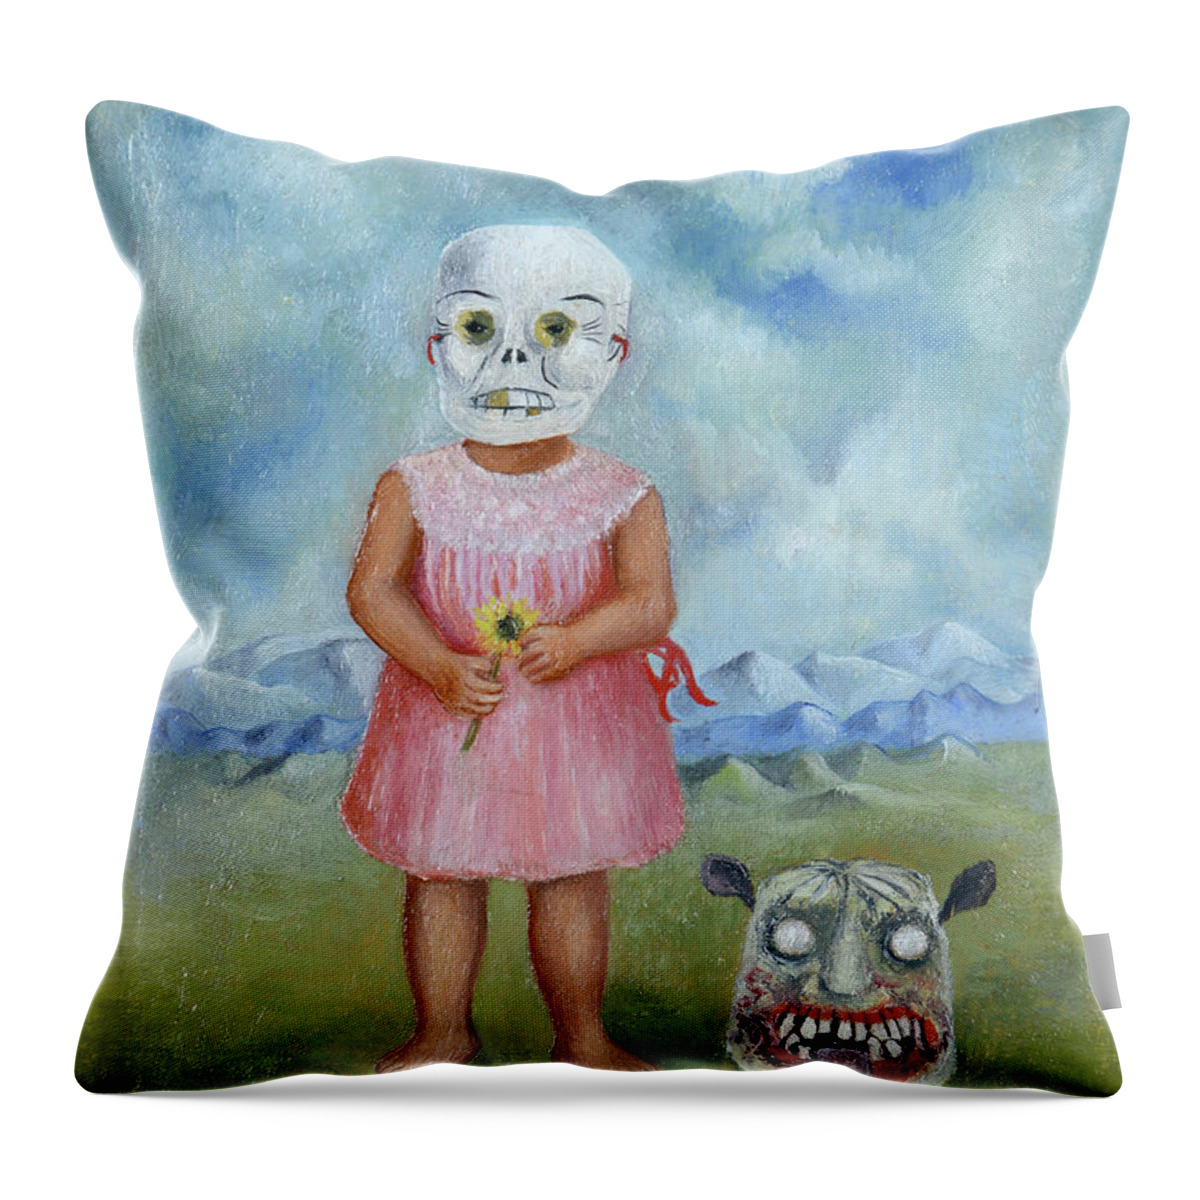 Frida Kahlo Throw Pillow featuring the painting Girl with Death Mask by Frida Kahlo